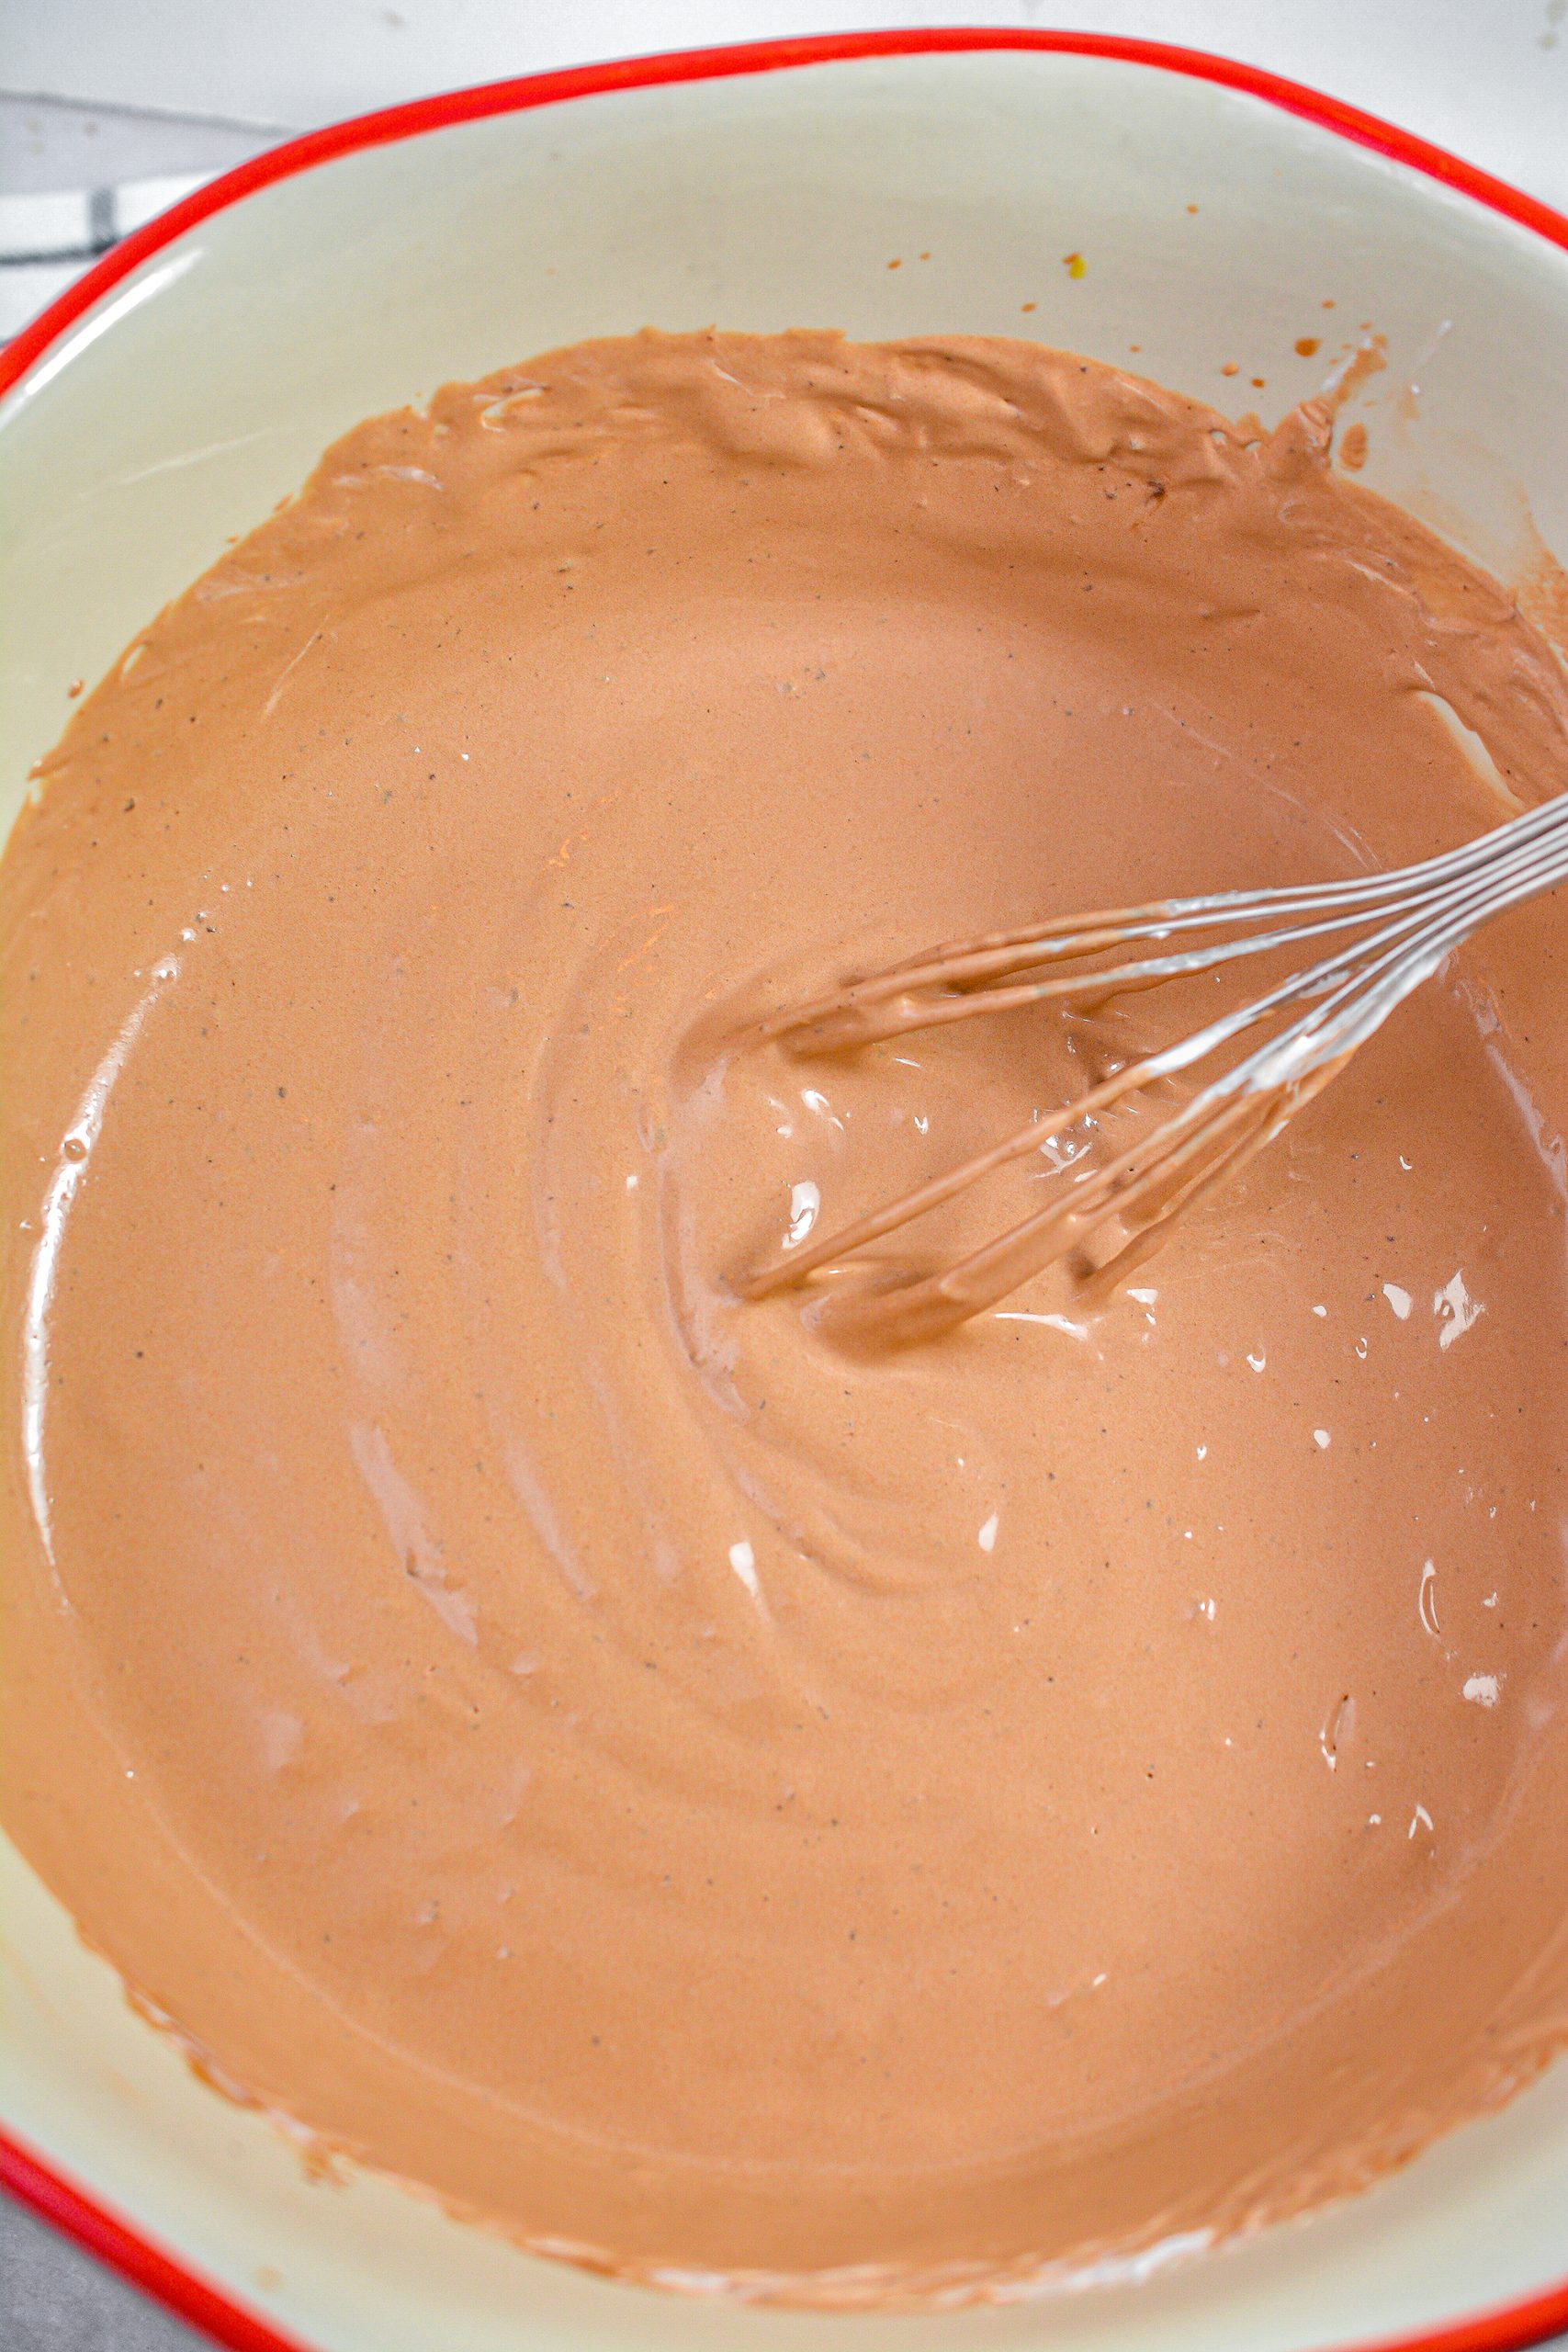 Whisk until smooth and let sit for 10 minutes.